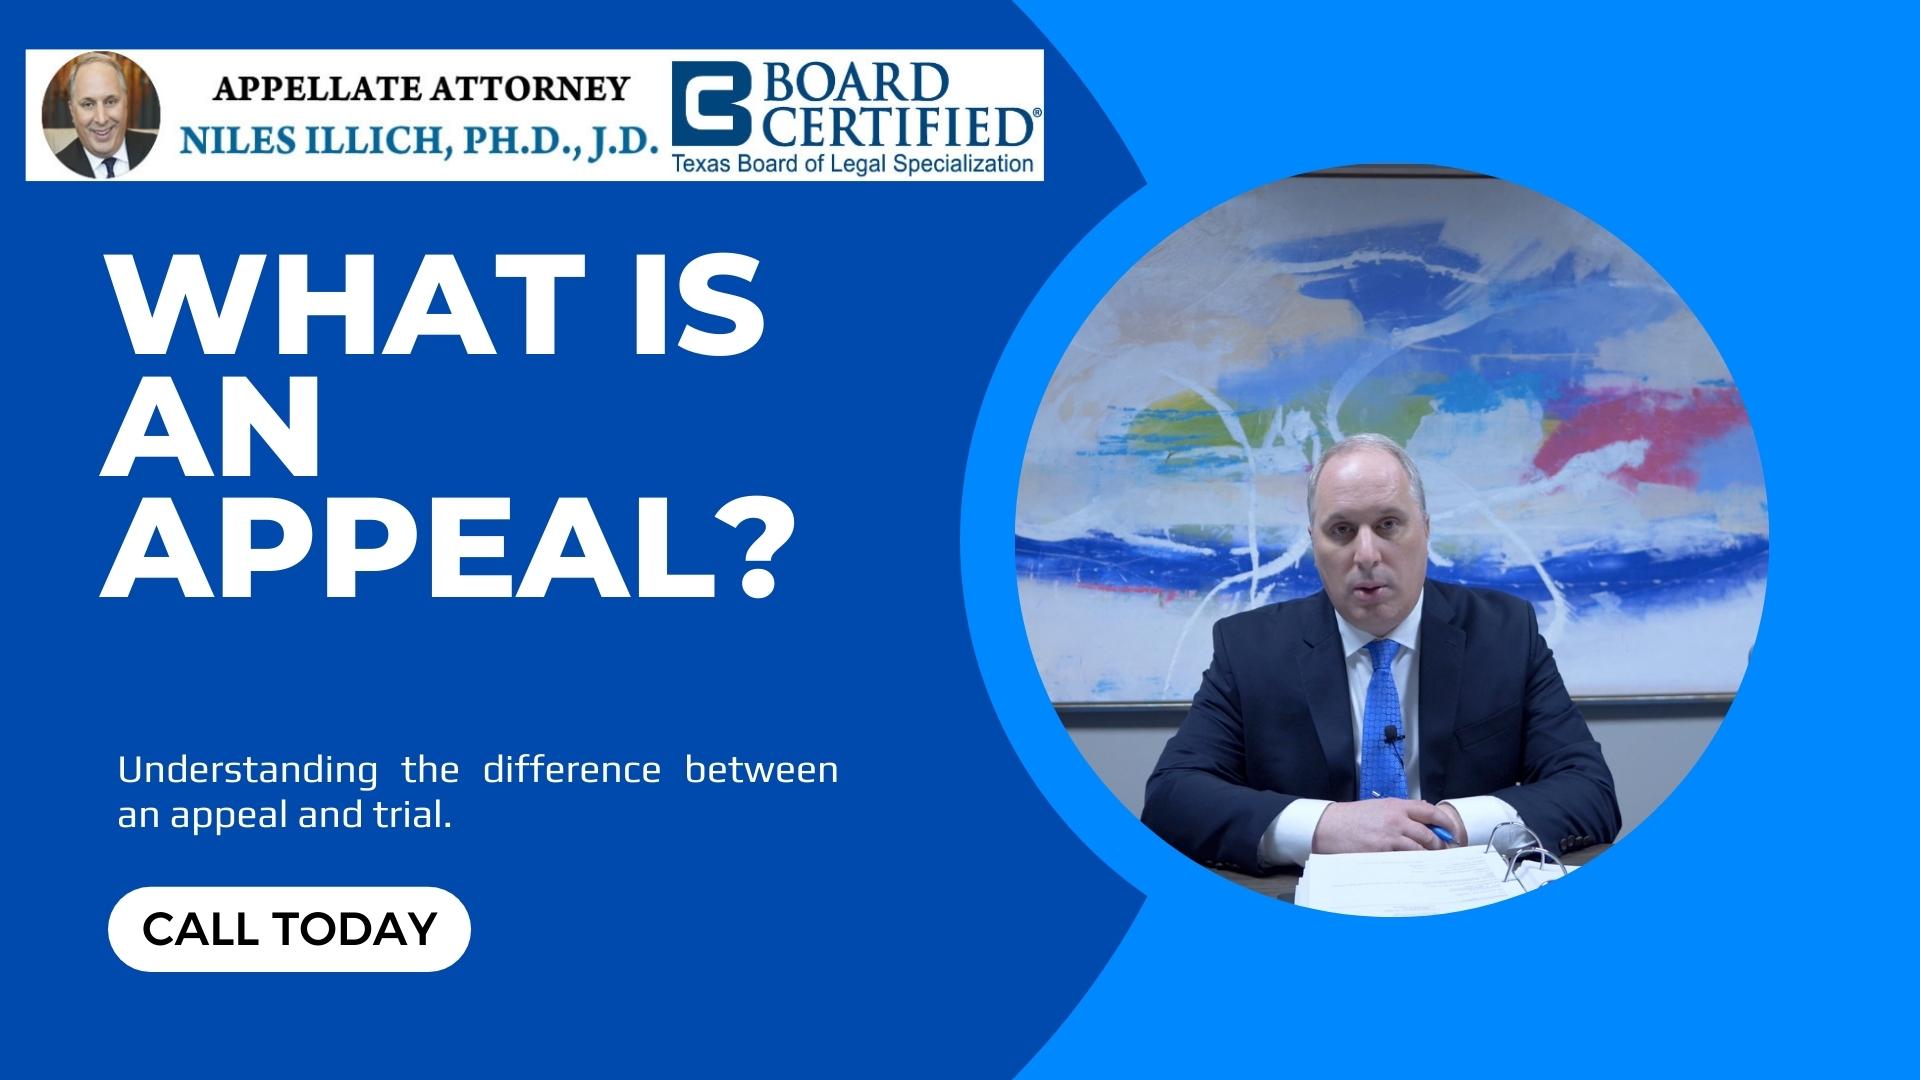 What is an appeal?